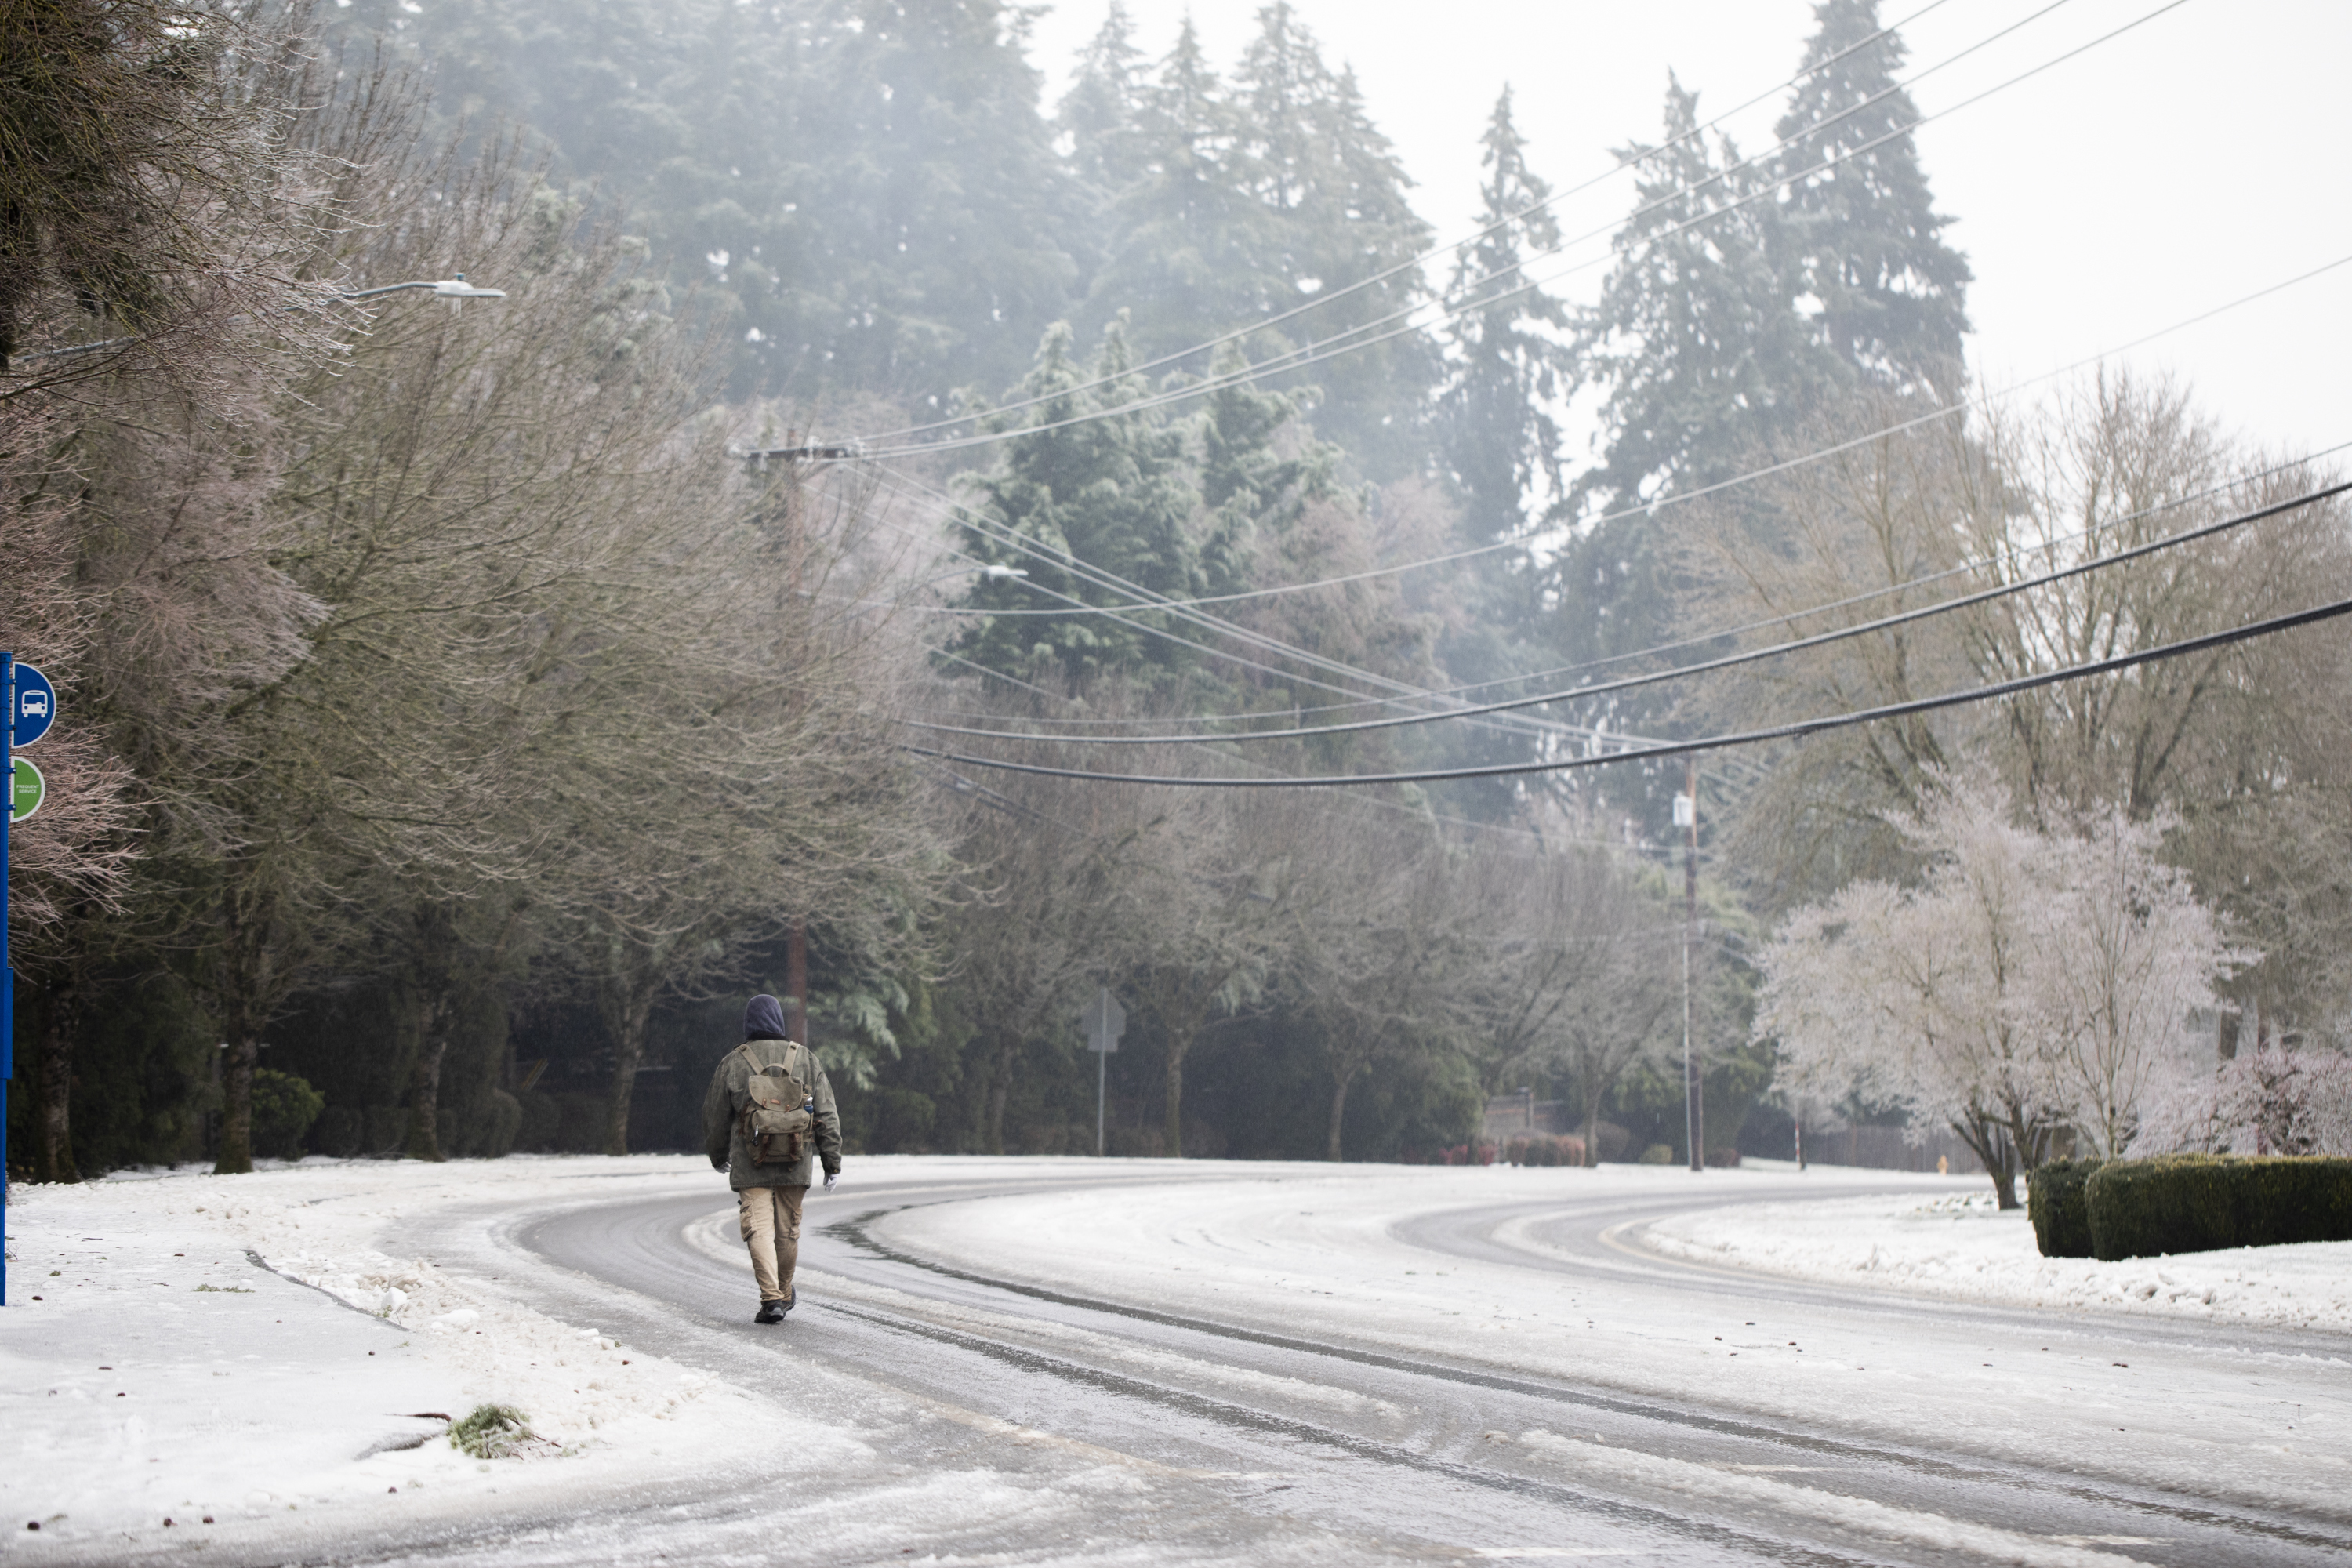 Columbia Gorge, Hood River Valley brace for ice storm this weekend - OPB